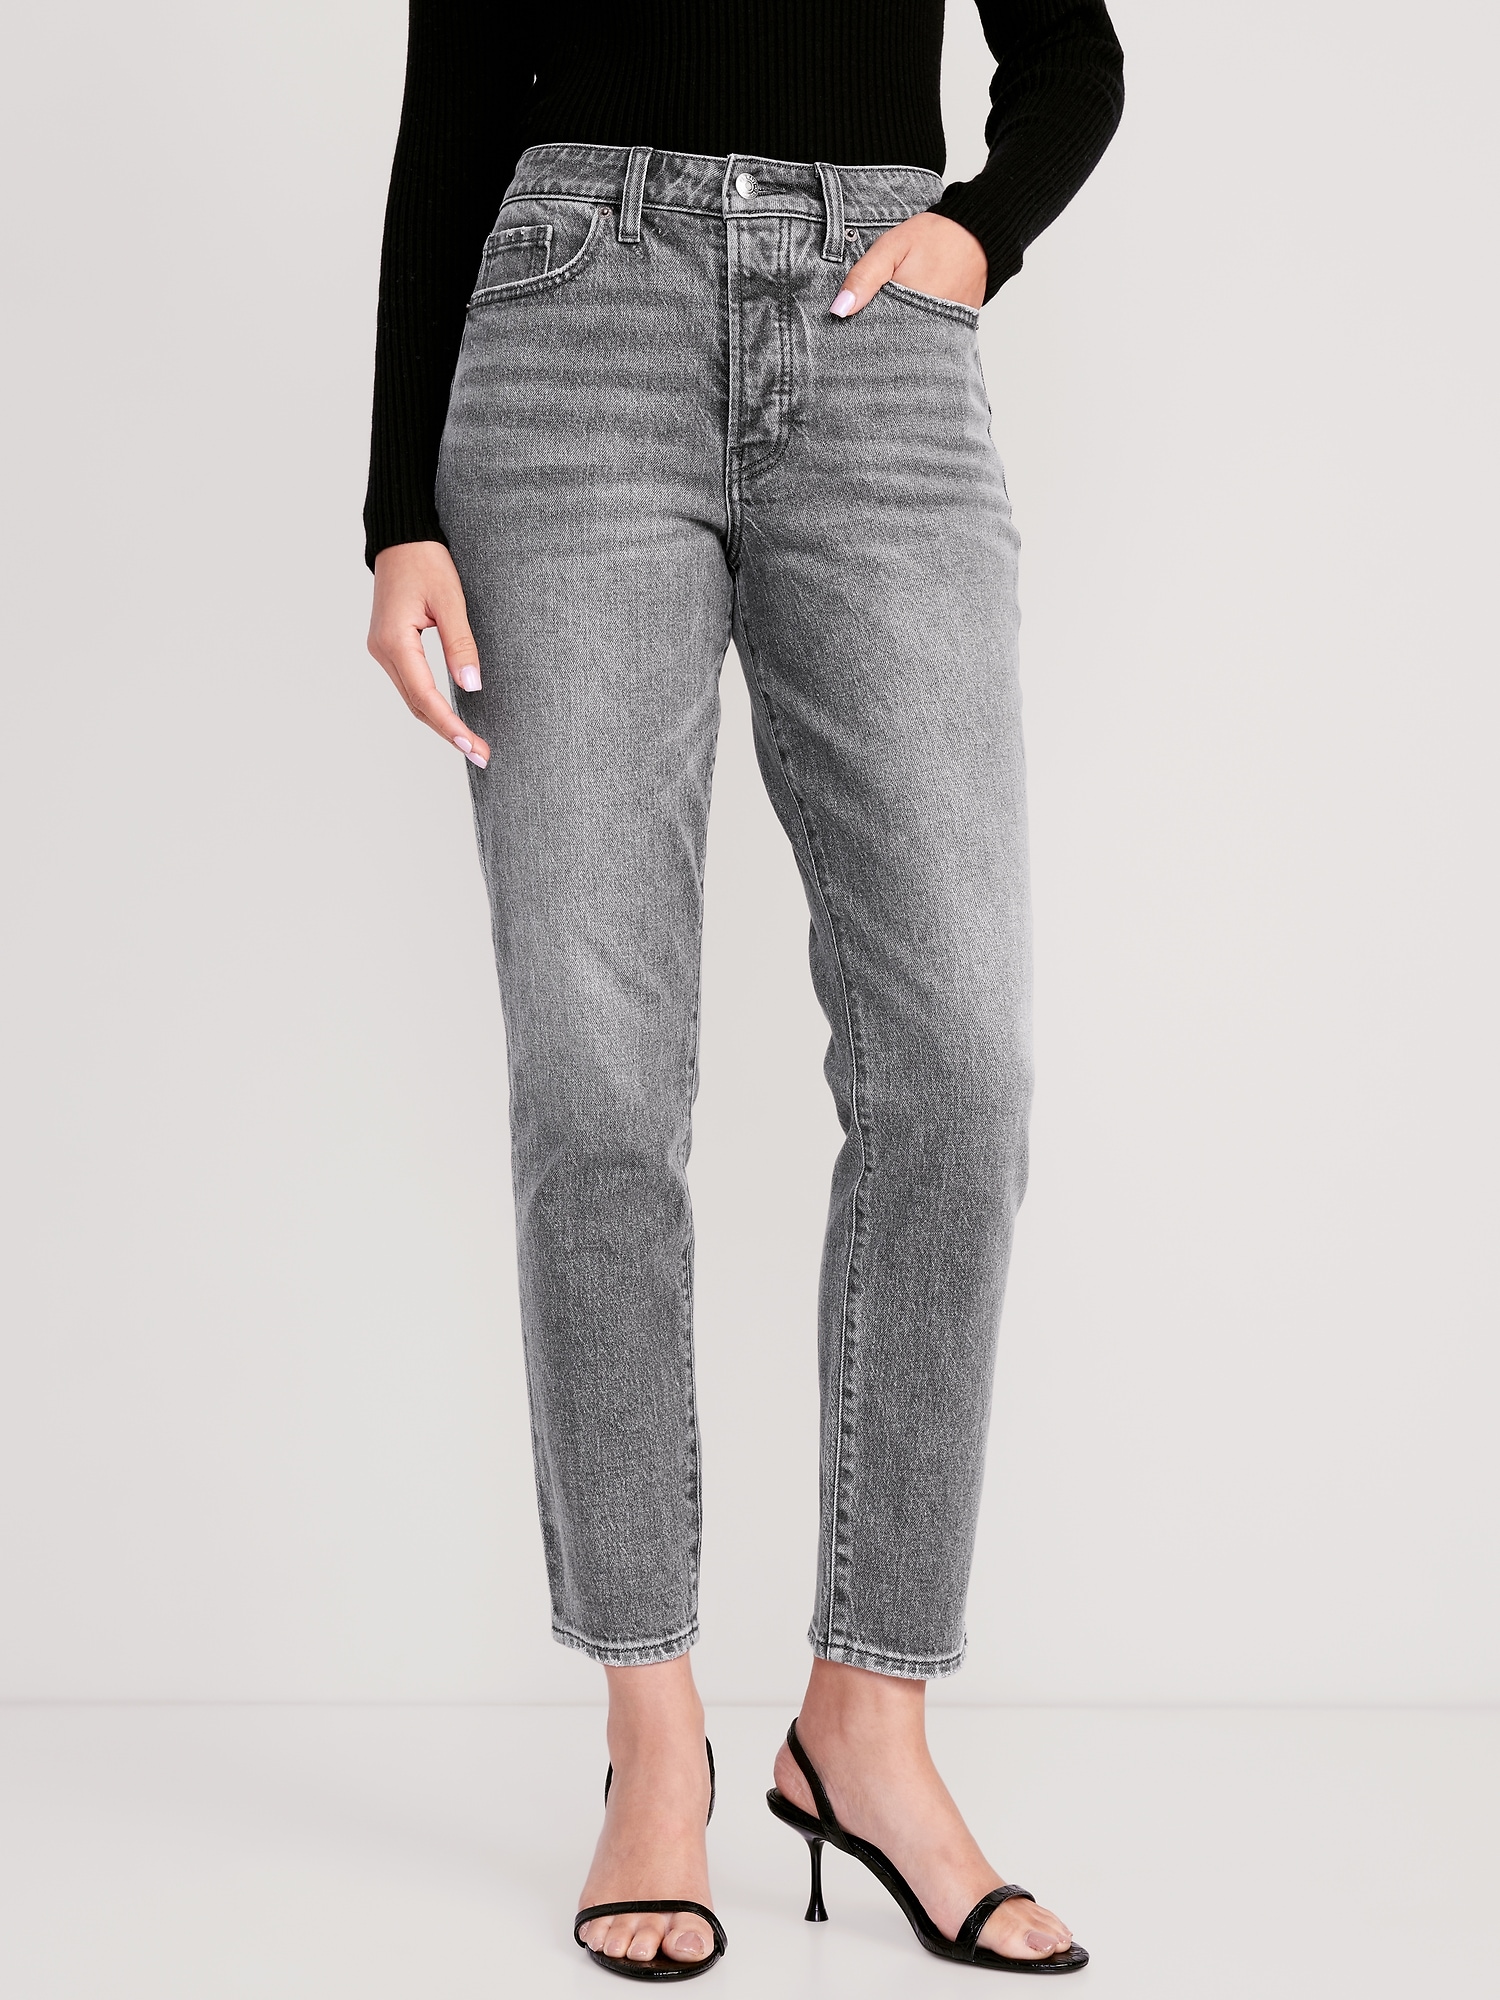 Oldnavy High-Waisted Button-Fly OG Straight Ankle Jeans for Women